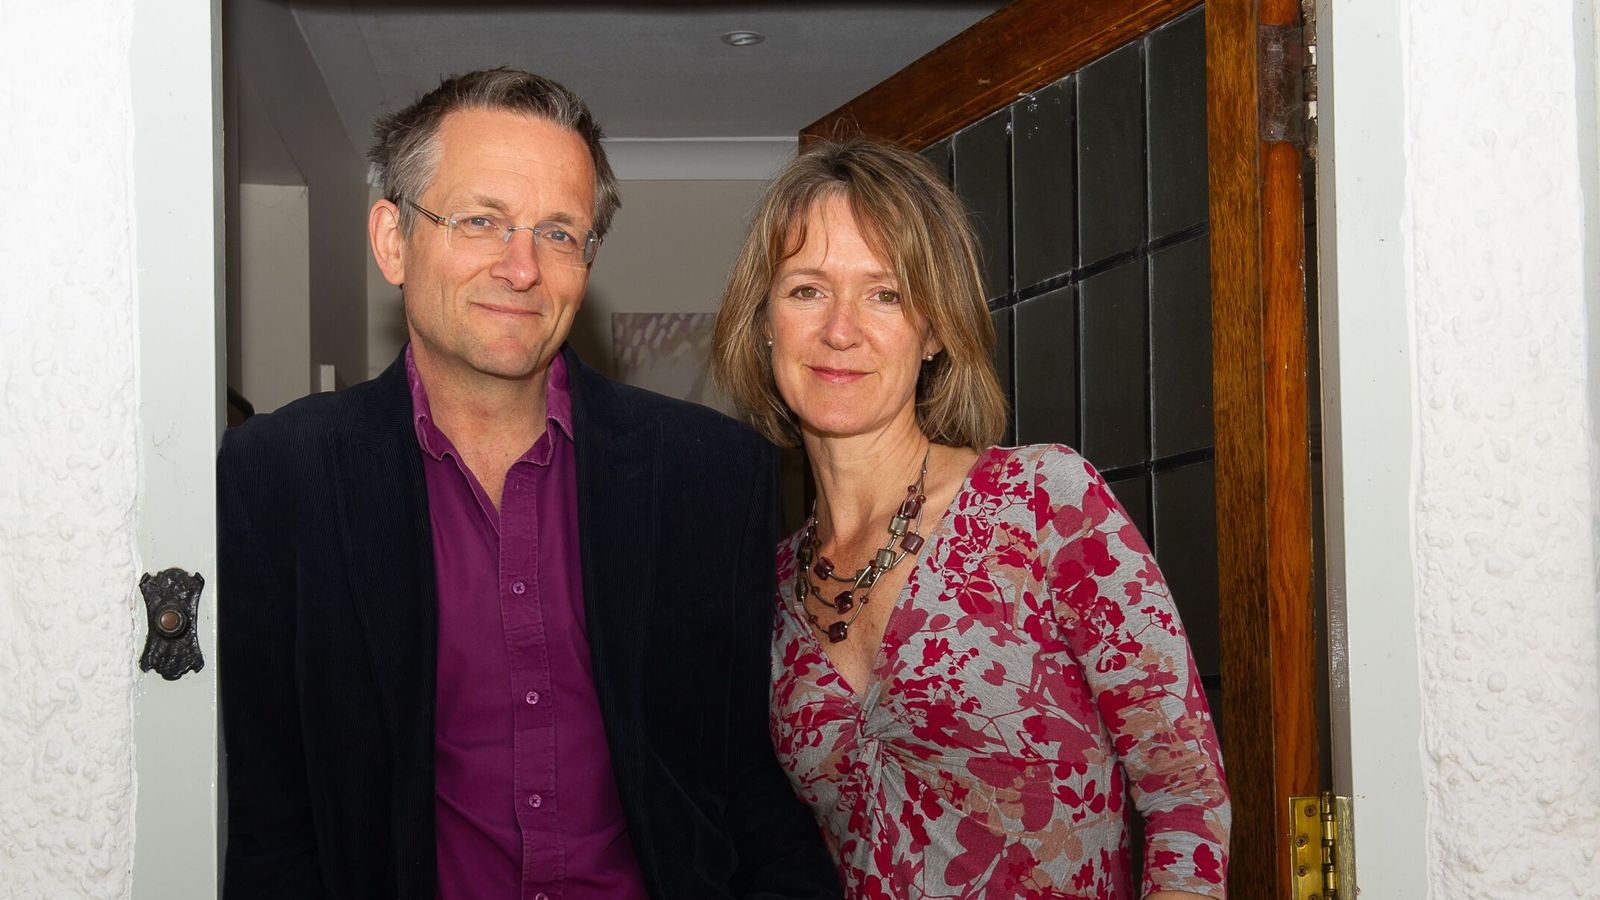 Dr Michael Mosley's widow posts emotional tribute - and reveals plan to continue his work